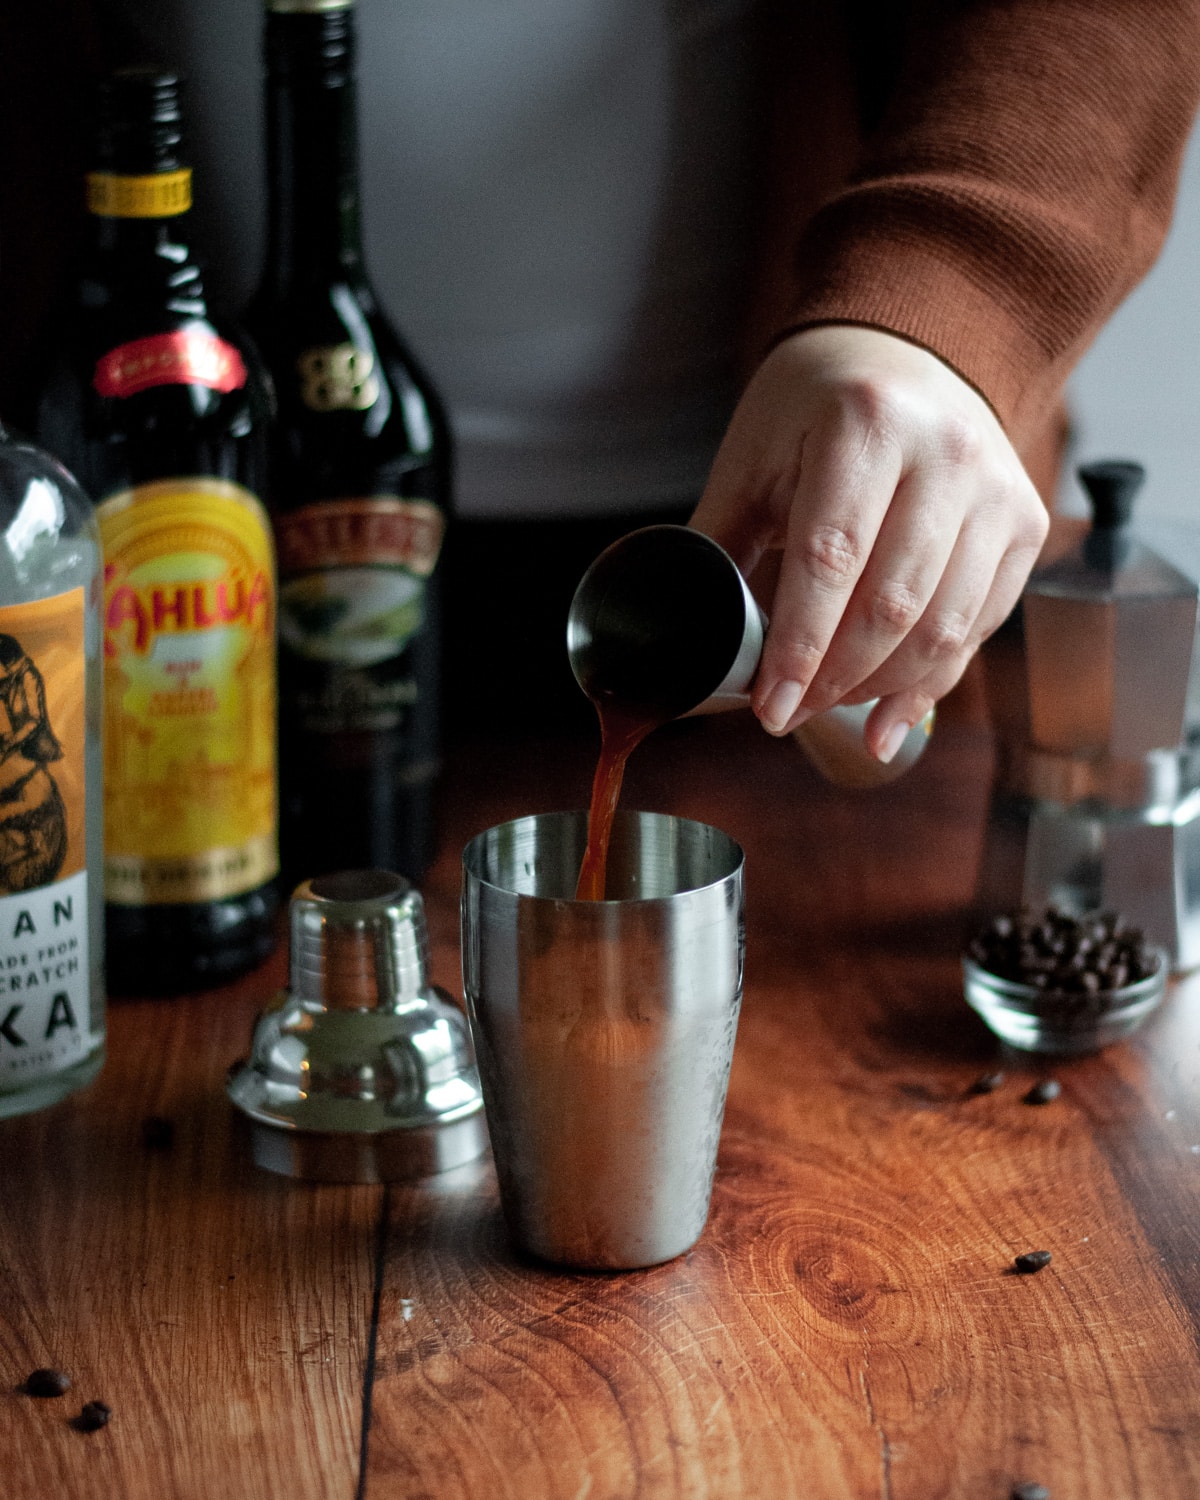 process shot of making an espresso martini with baileys. a person is pouring one of the liquid ingredients into a silver cocktail shaker from a jigger. liquor bottles, a moka pot, and coffee beans sit in the background.